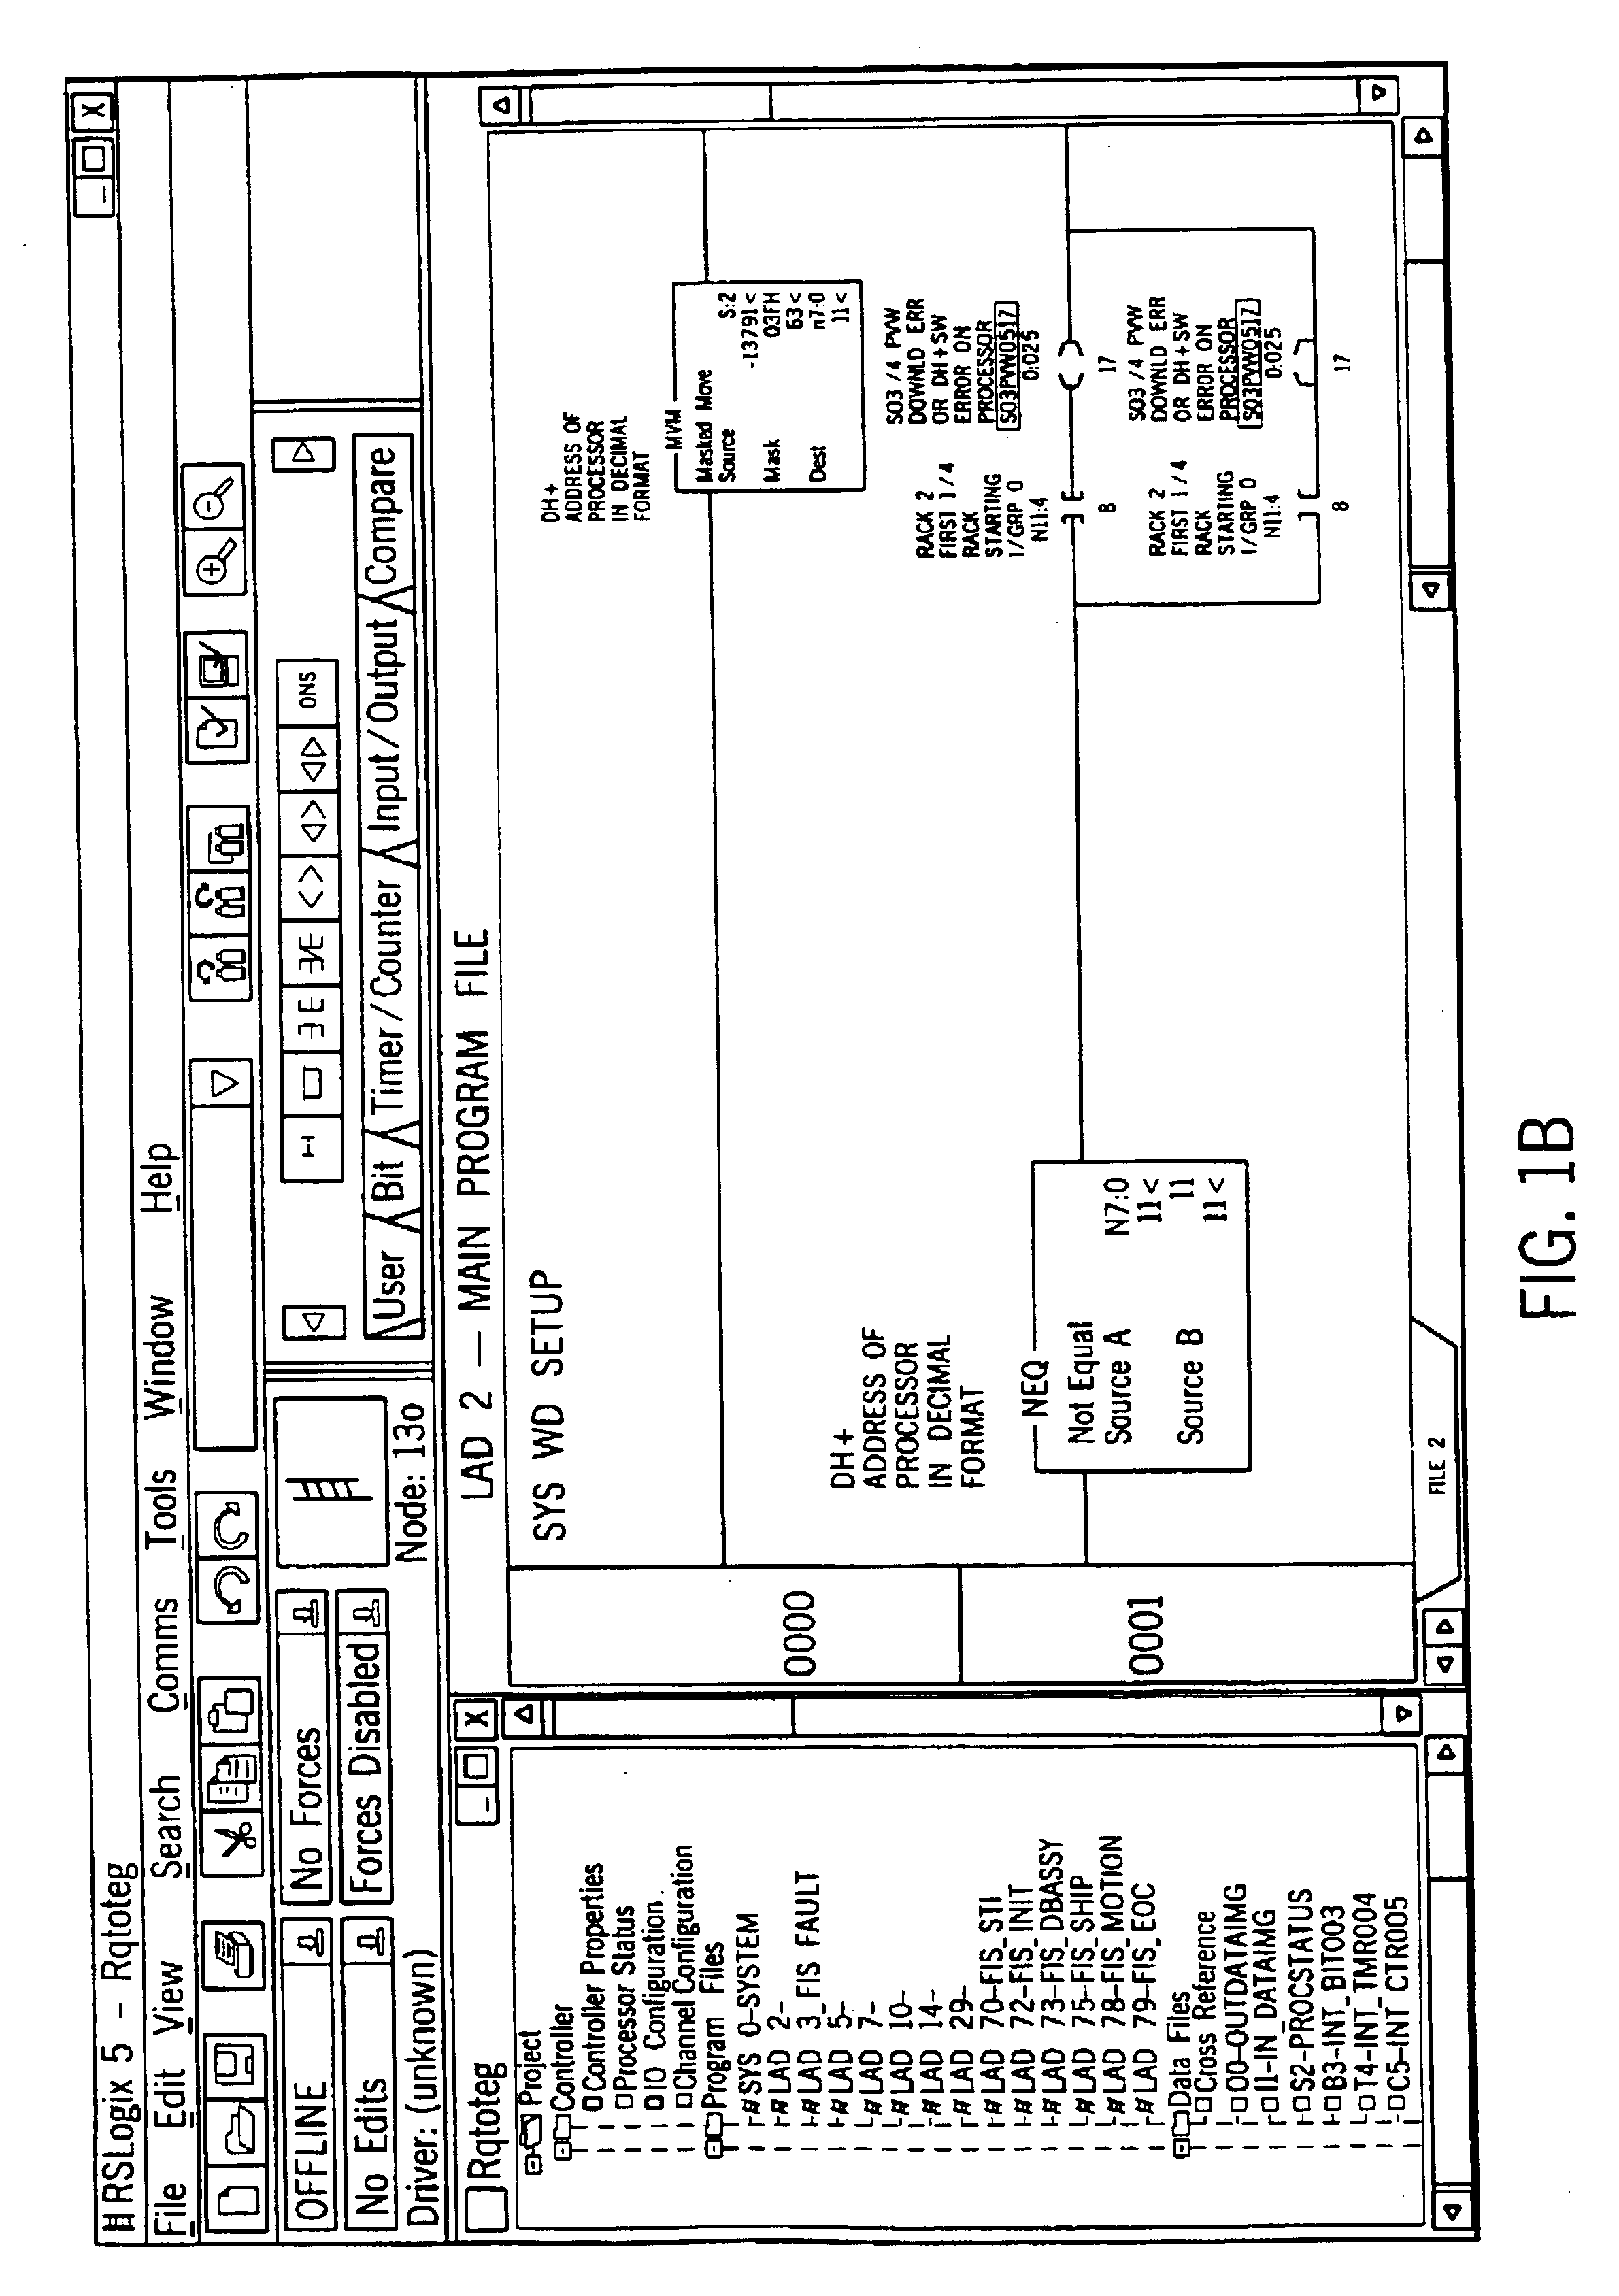 Diagnostics method and apparatus for use with enterprise controls